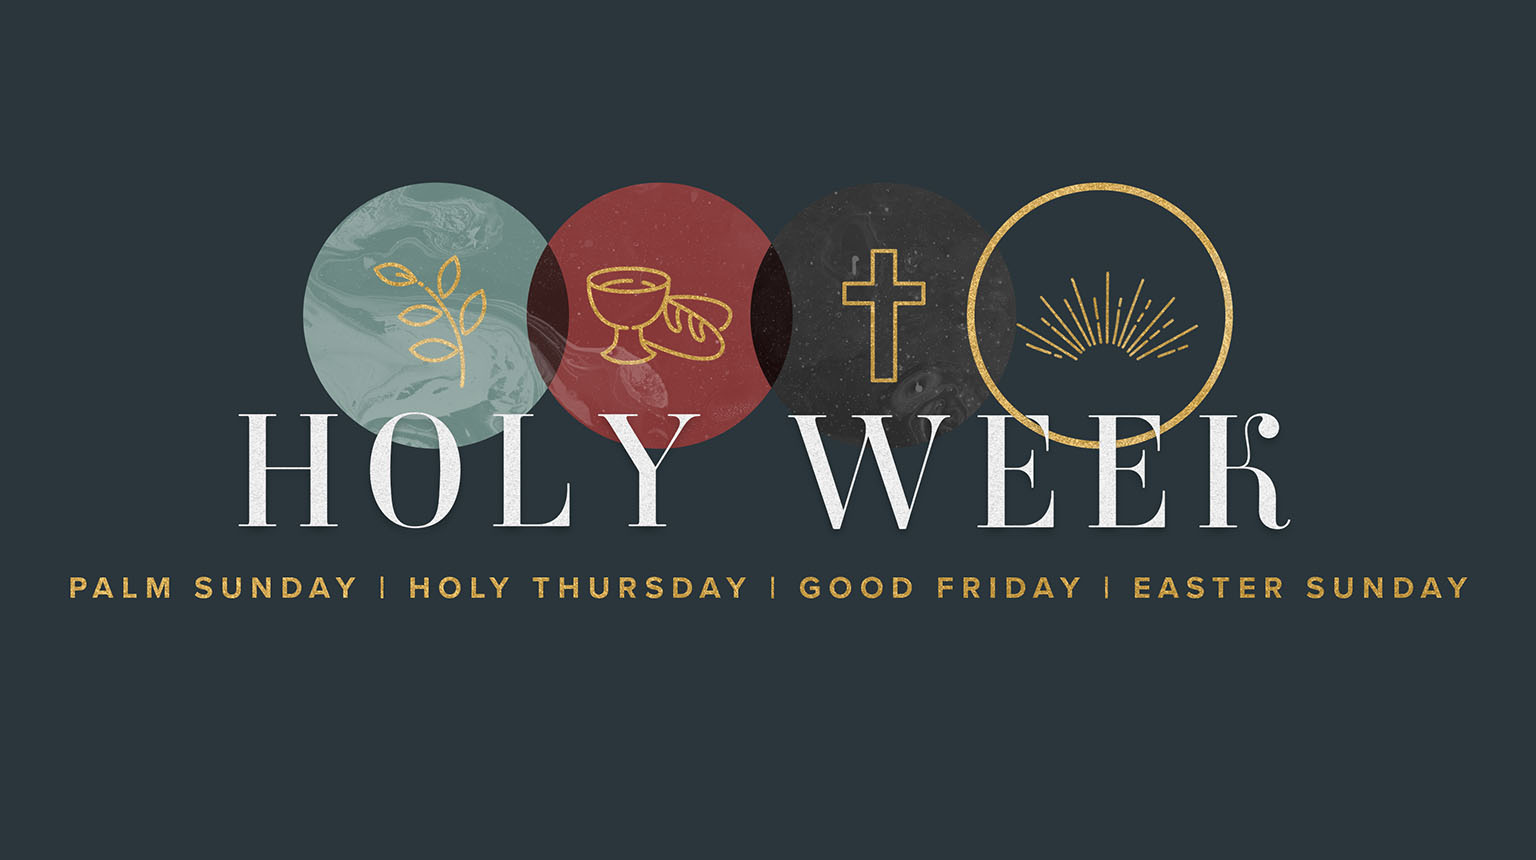 Silhouettes of a palm branch, communion, a cross and a crown. Text says: holy week.